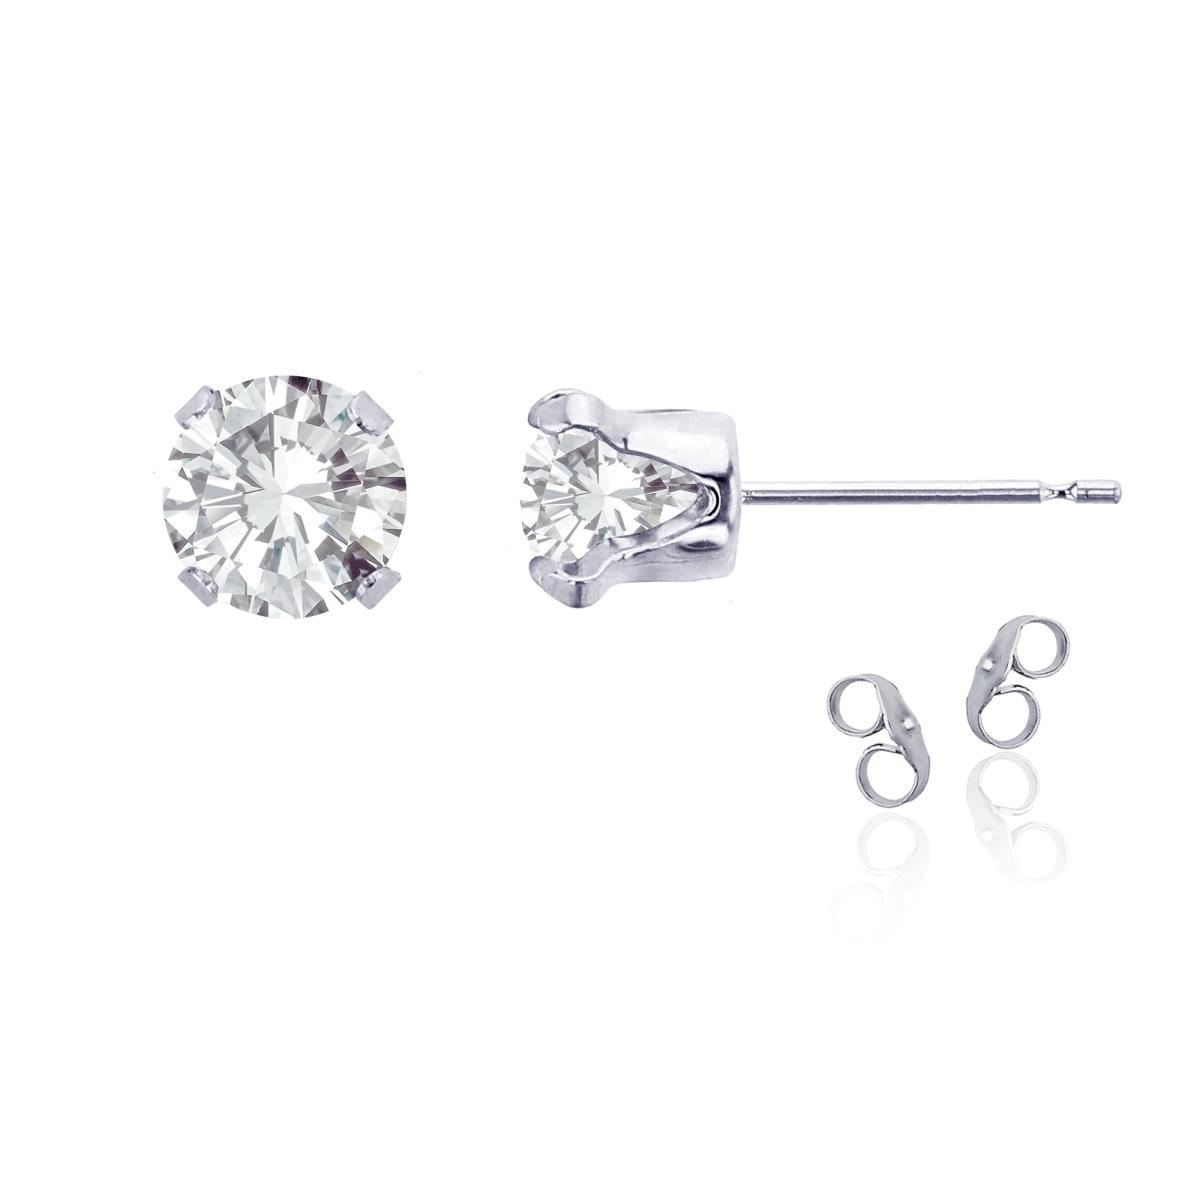 Sterling Silver Rhodium 6mm Round White Topaz Stud Earring with Clutch